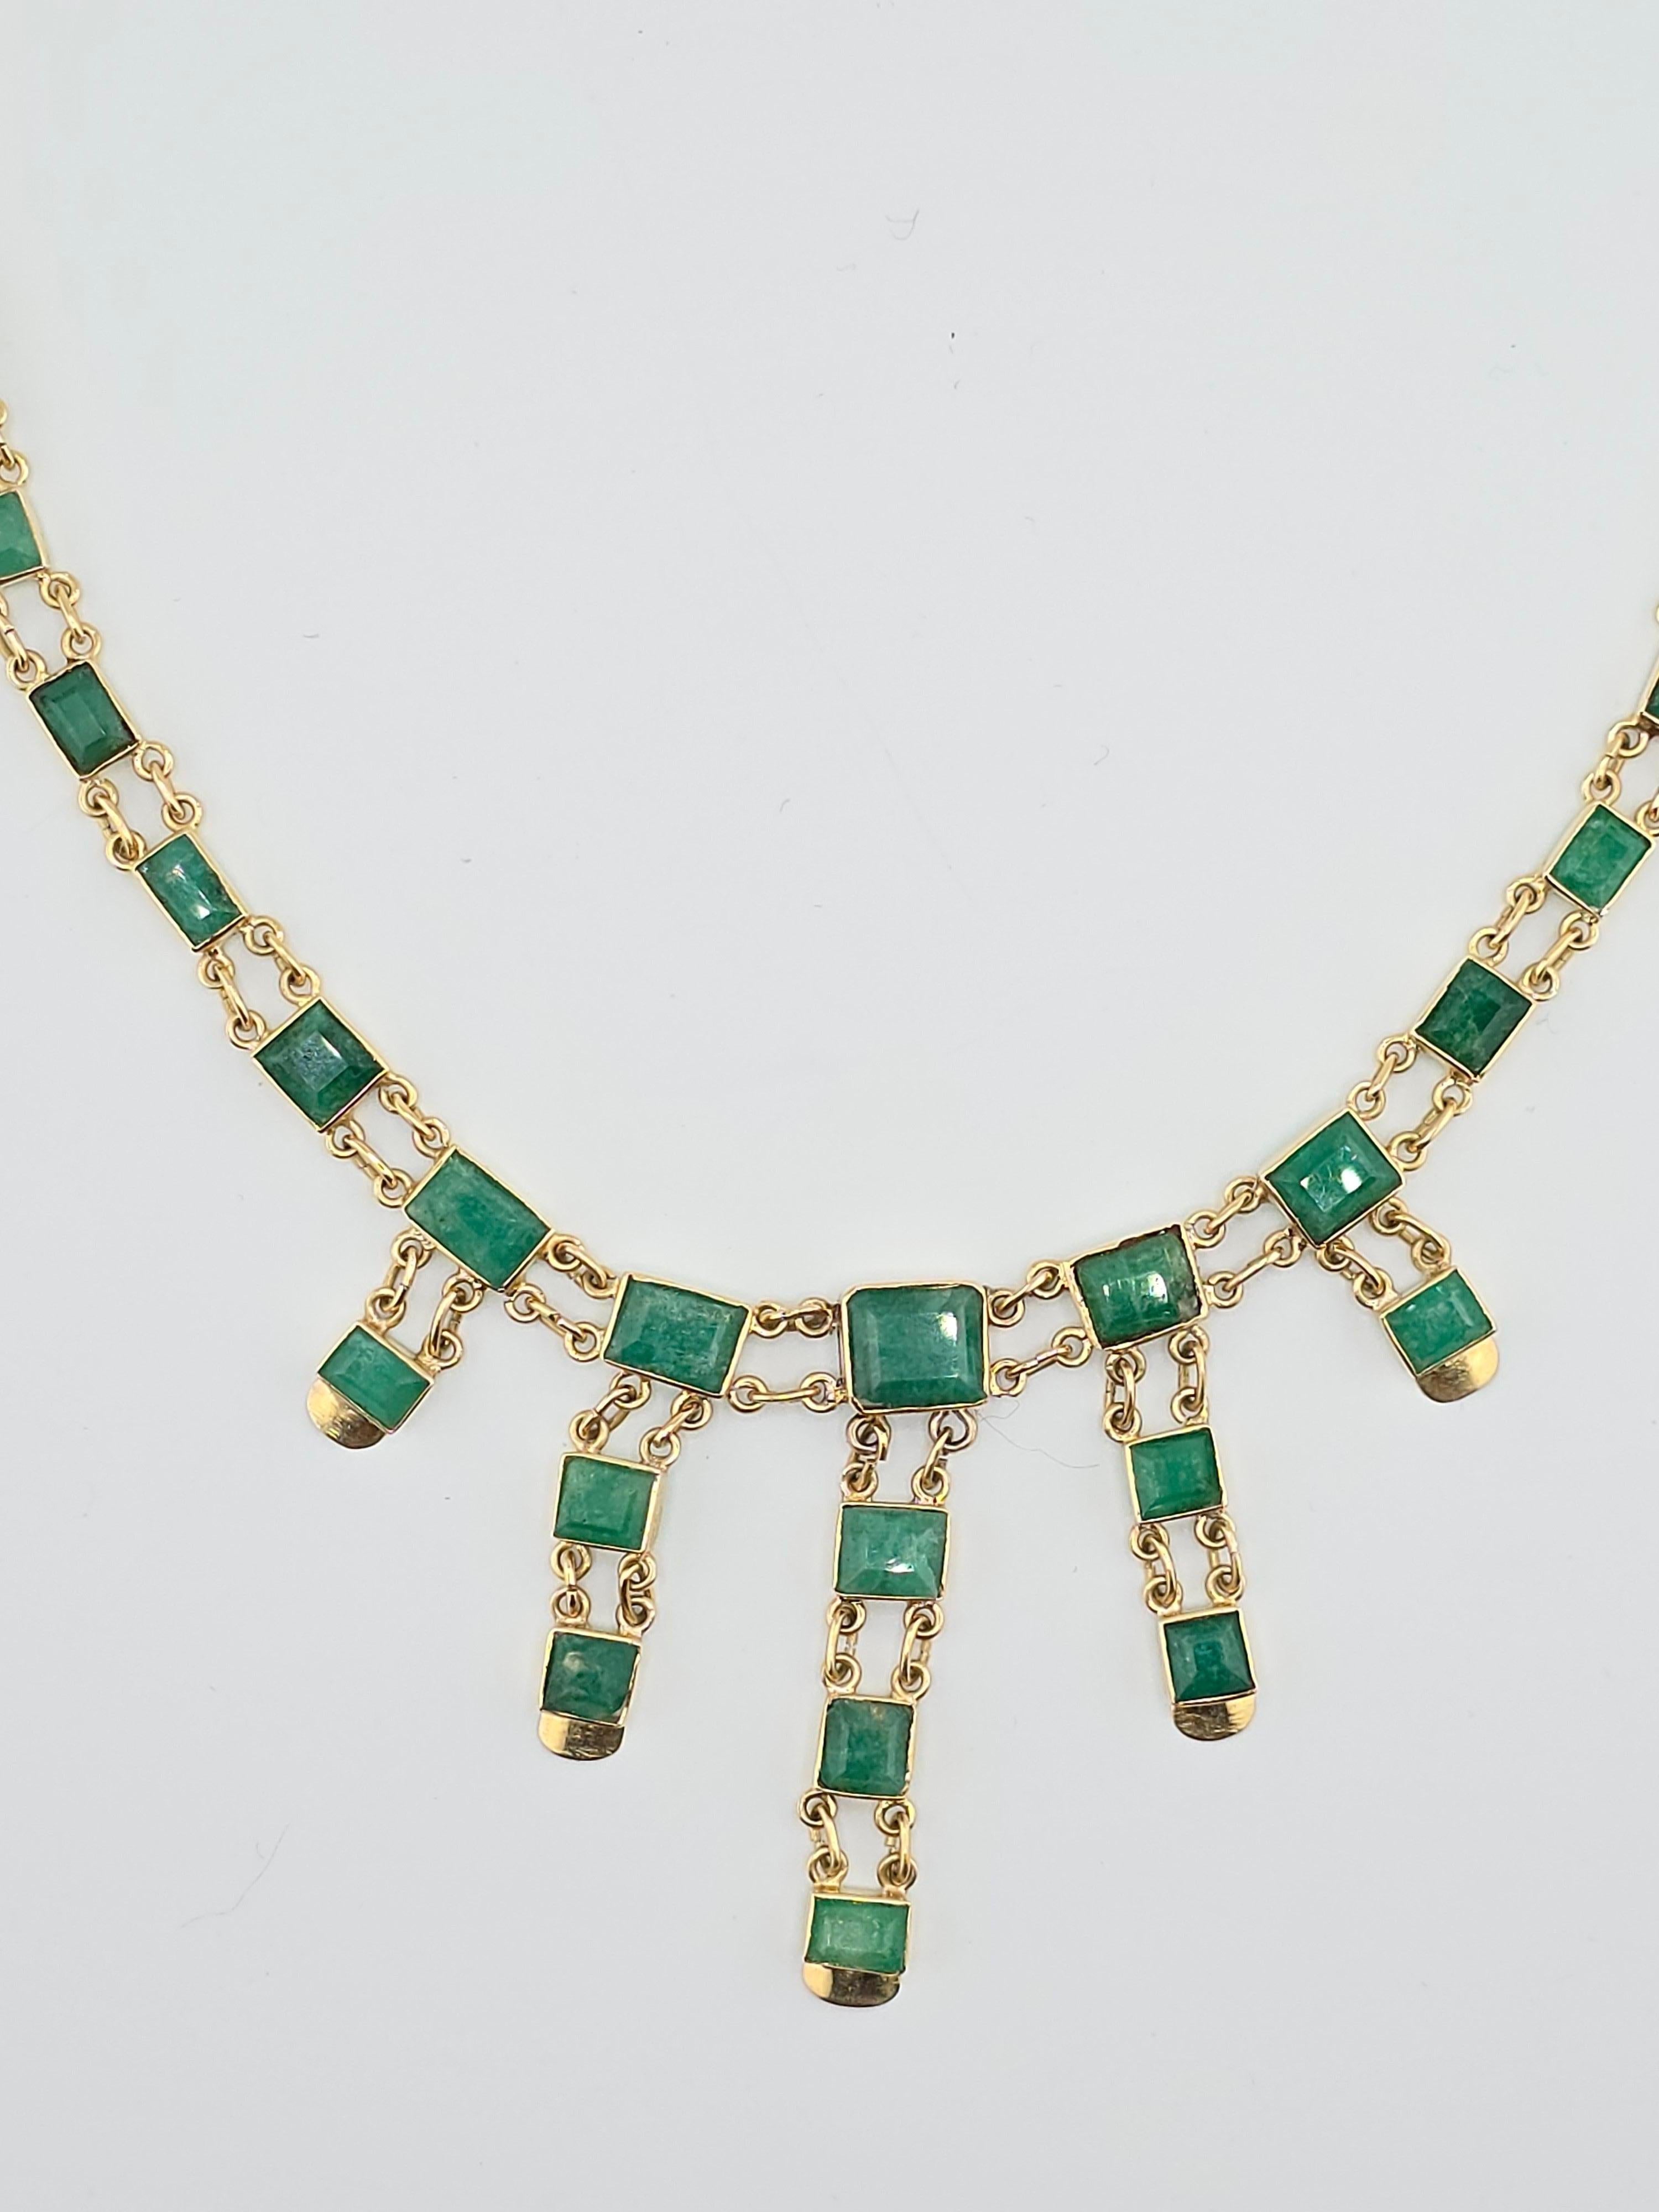 Majestic 14K Yellow Gold & Emerald Necklace 31.74 Grams For Sale 4